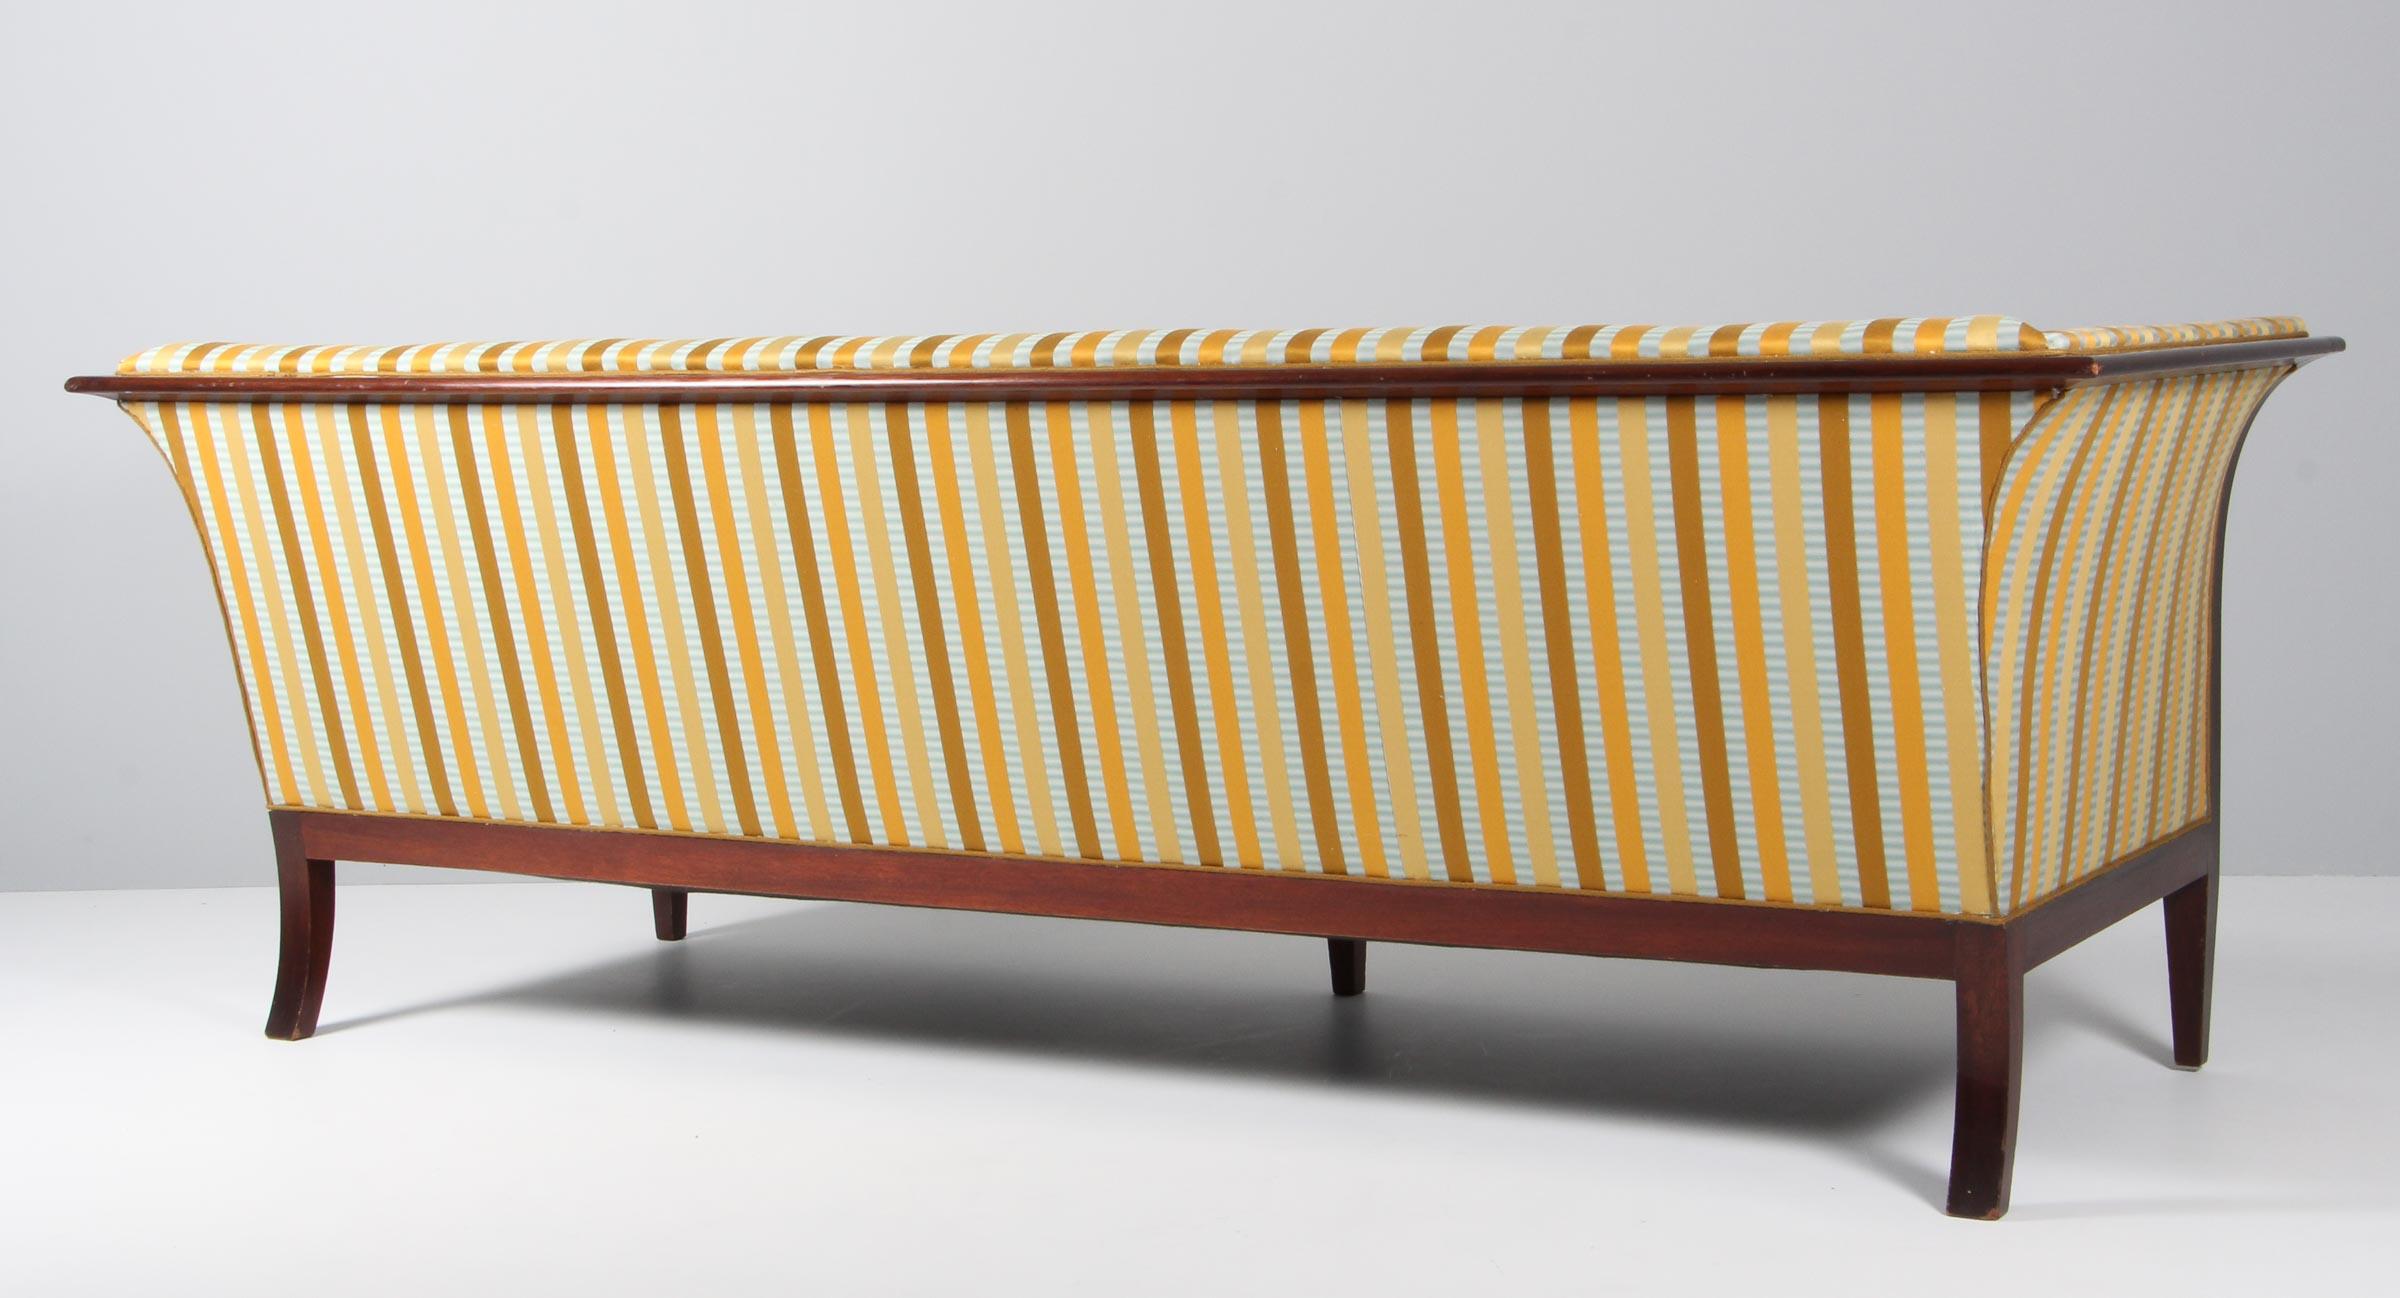 Frits Henningsen three seat sofa upholstered with striped fabric.

Frame of mahogany. 

Made in the 1940s.

